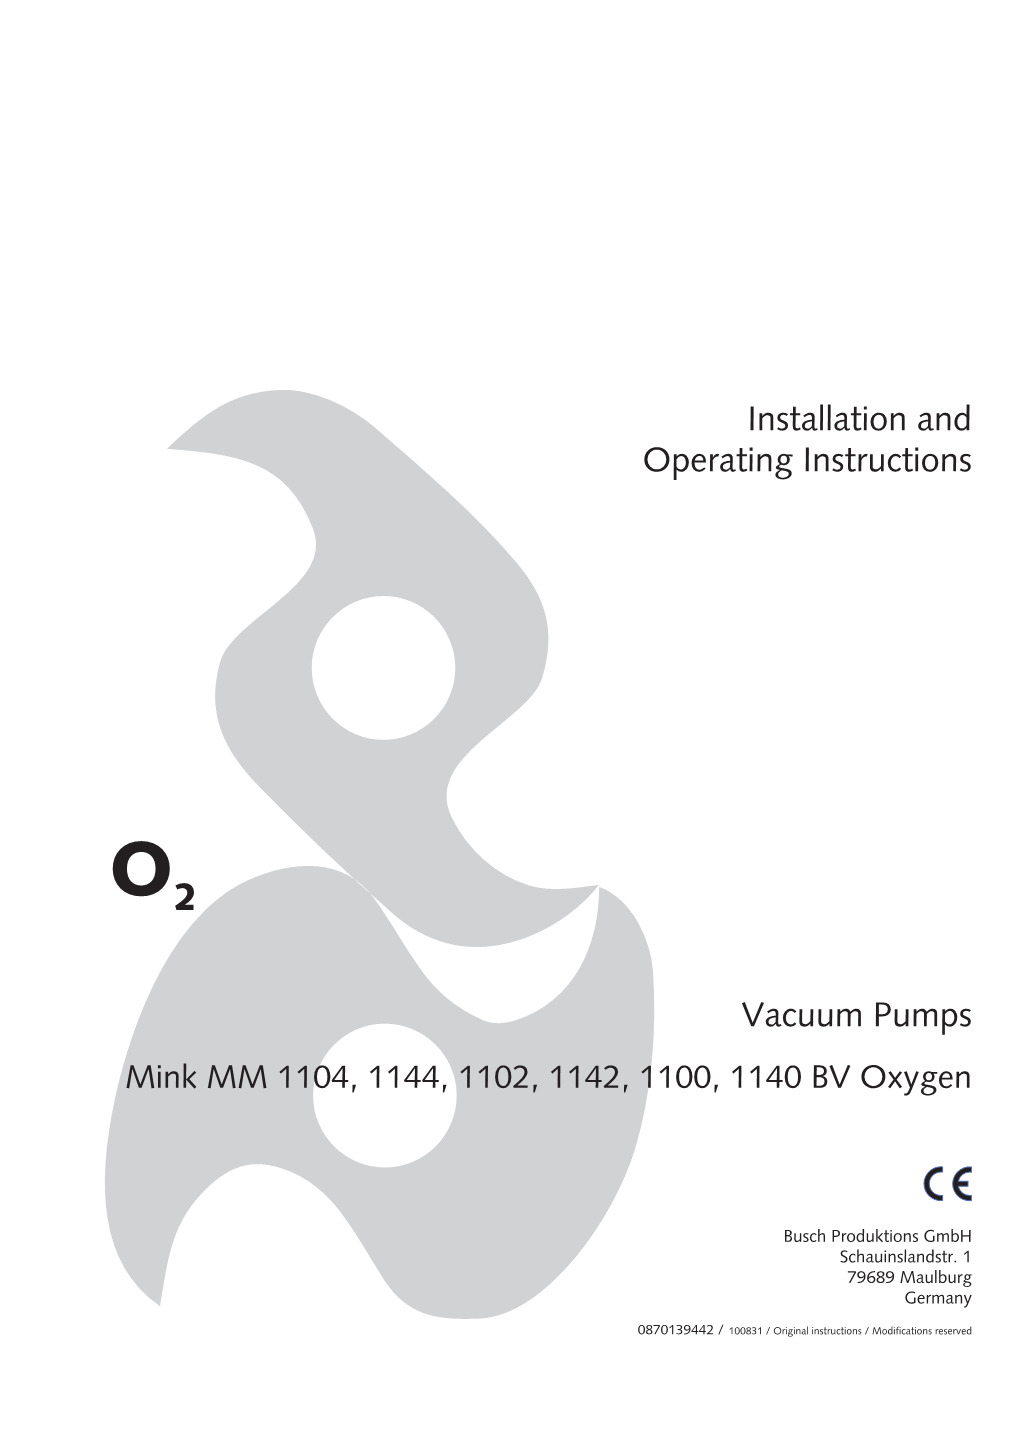 Installation and Operating Instructions Vacuum Pumps